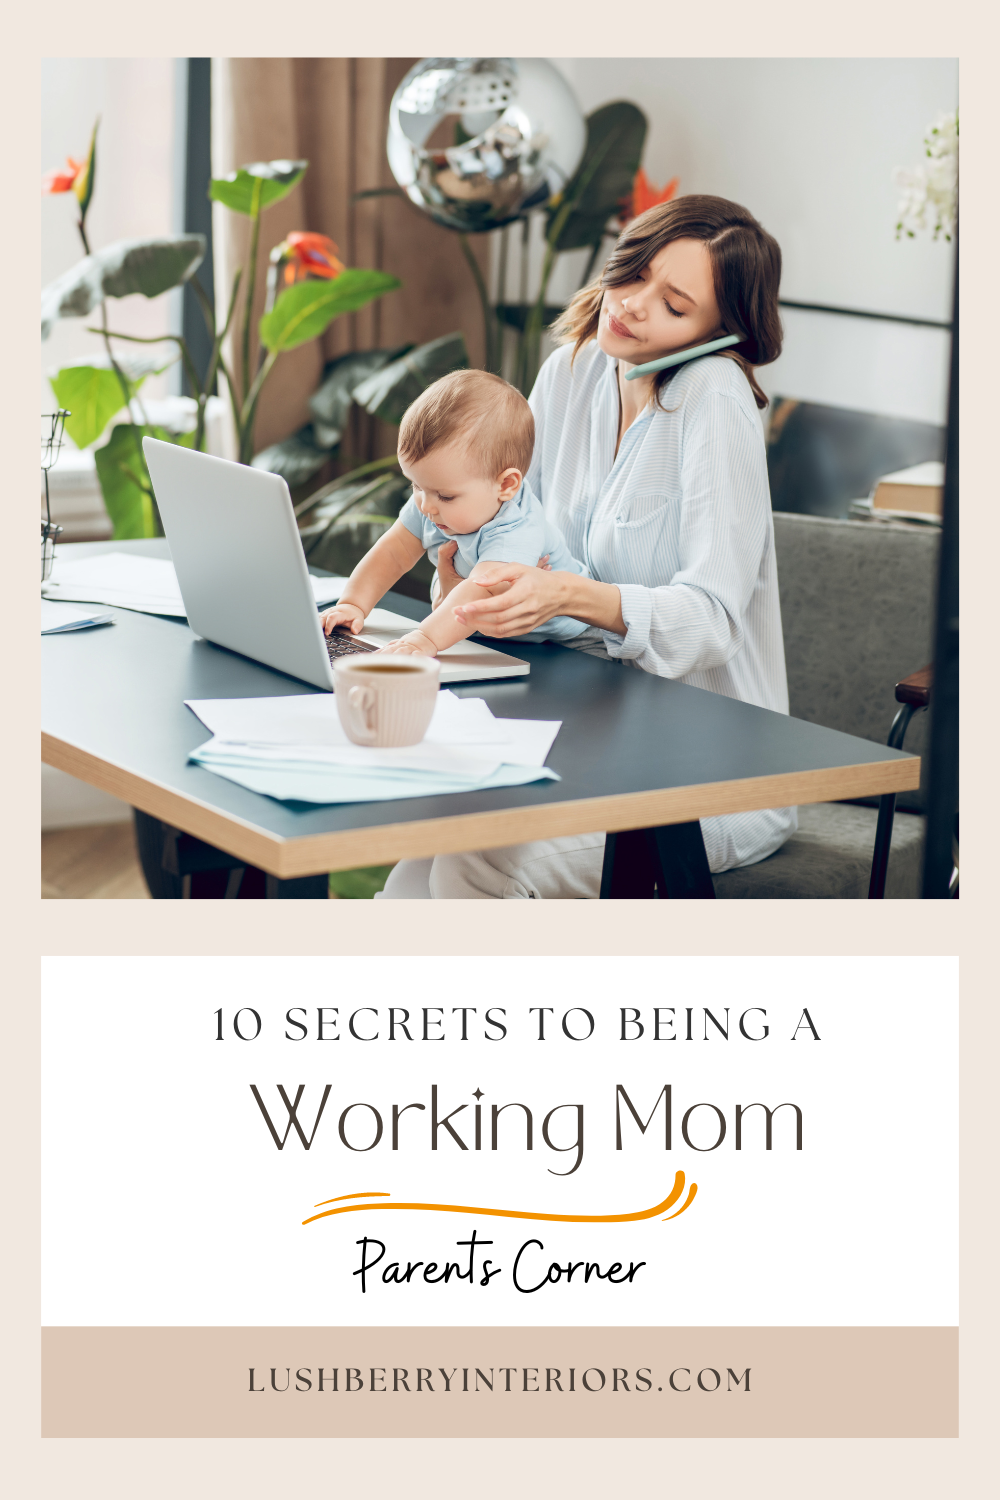 10 secrets to being a working mom